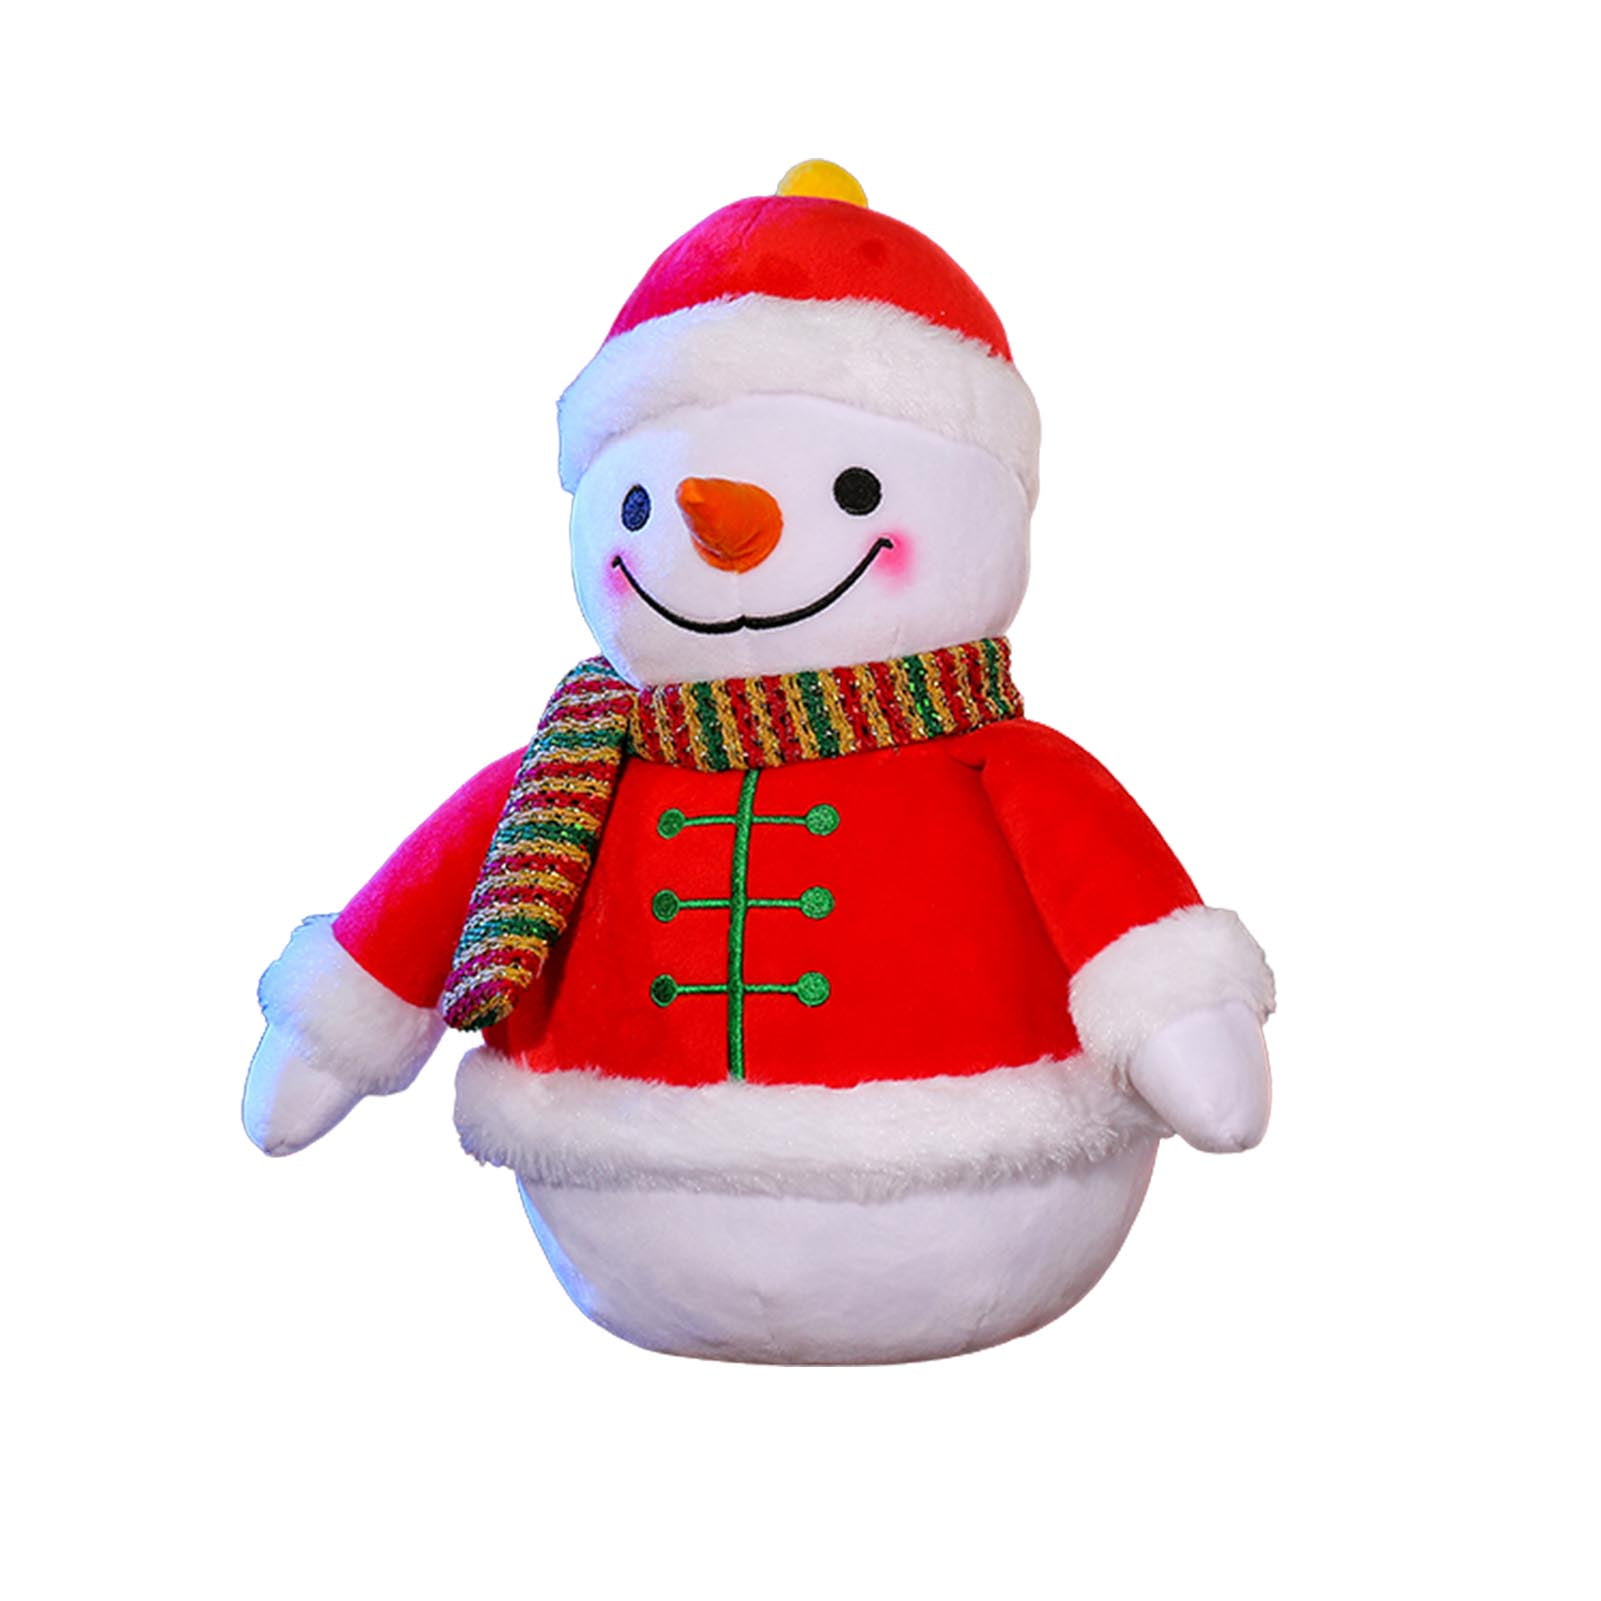 The Cuddly Snowman Toy Soft Plush 22cm   Baby Gift FAST DISPATCH! 